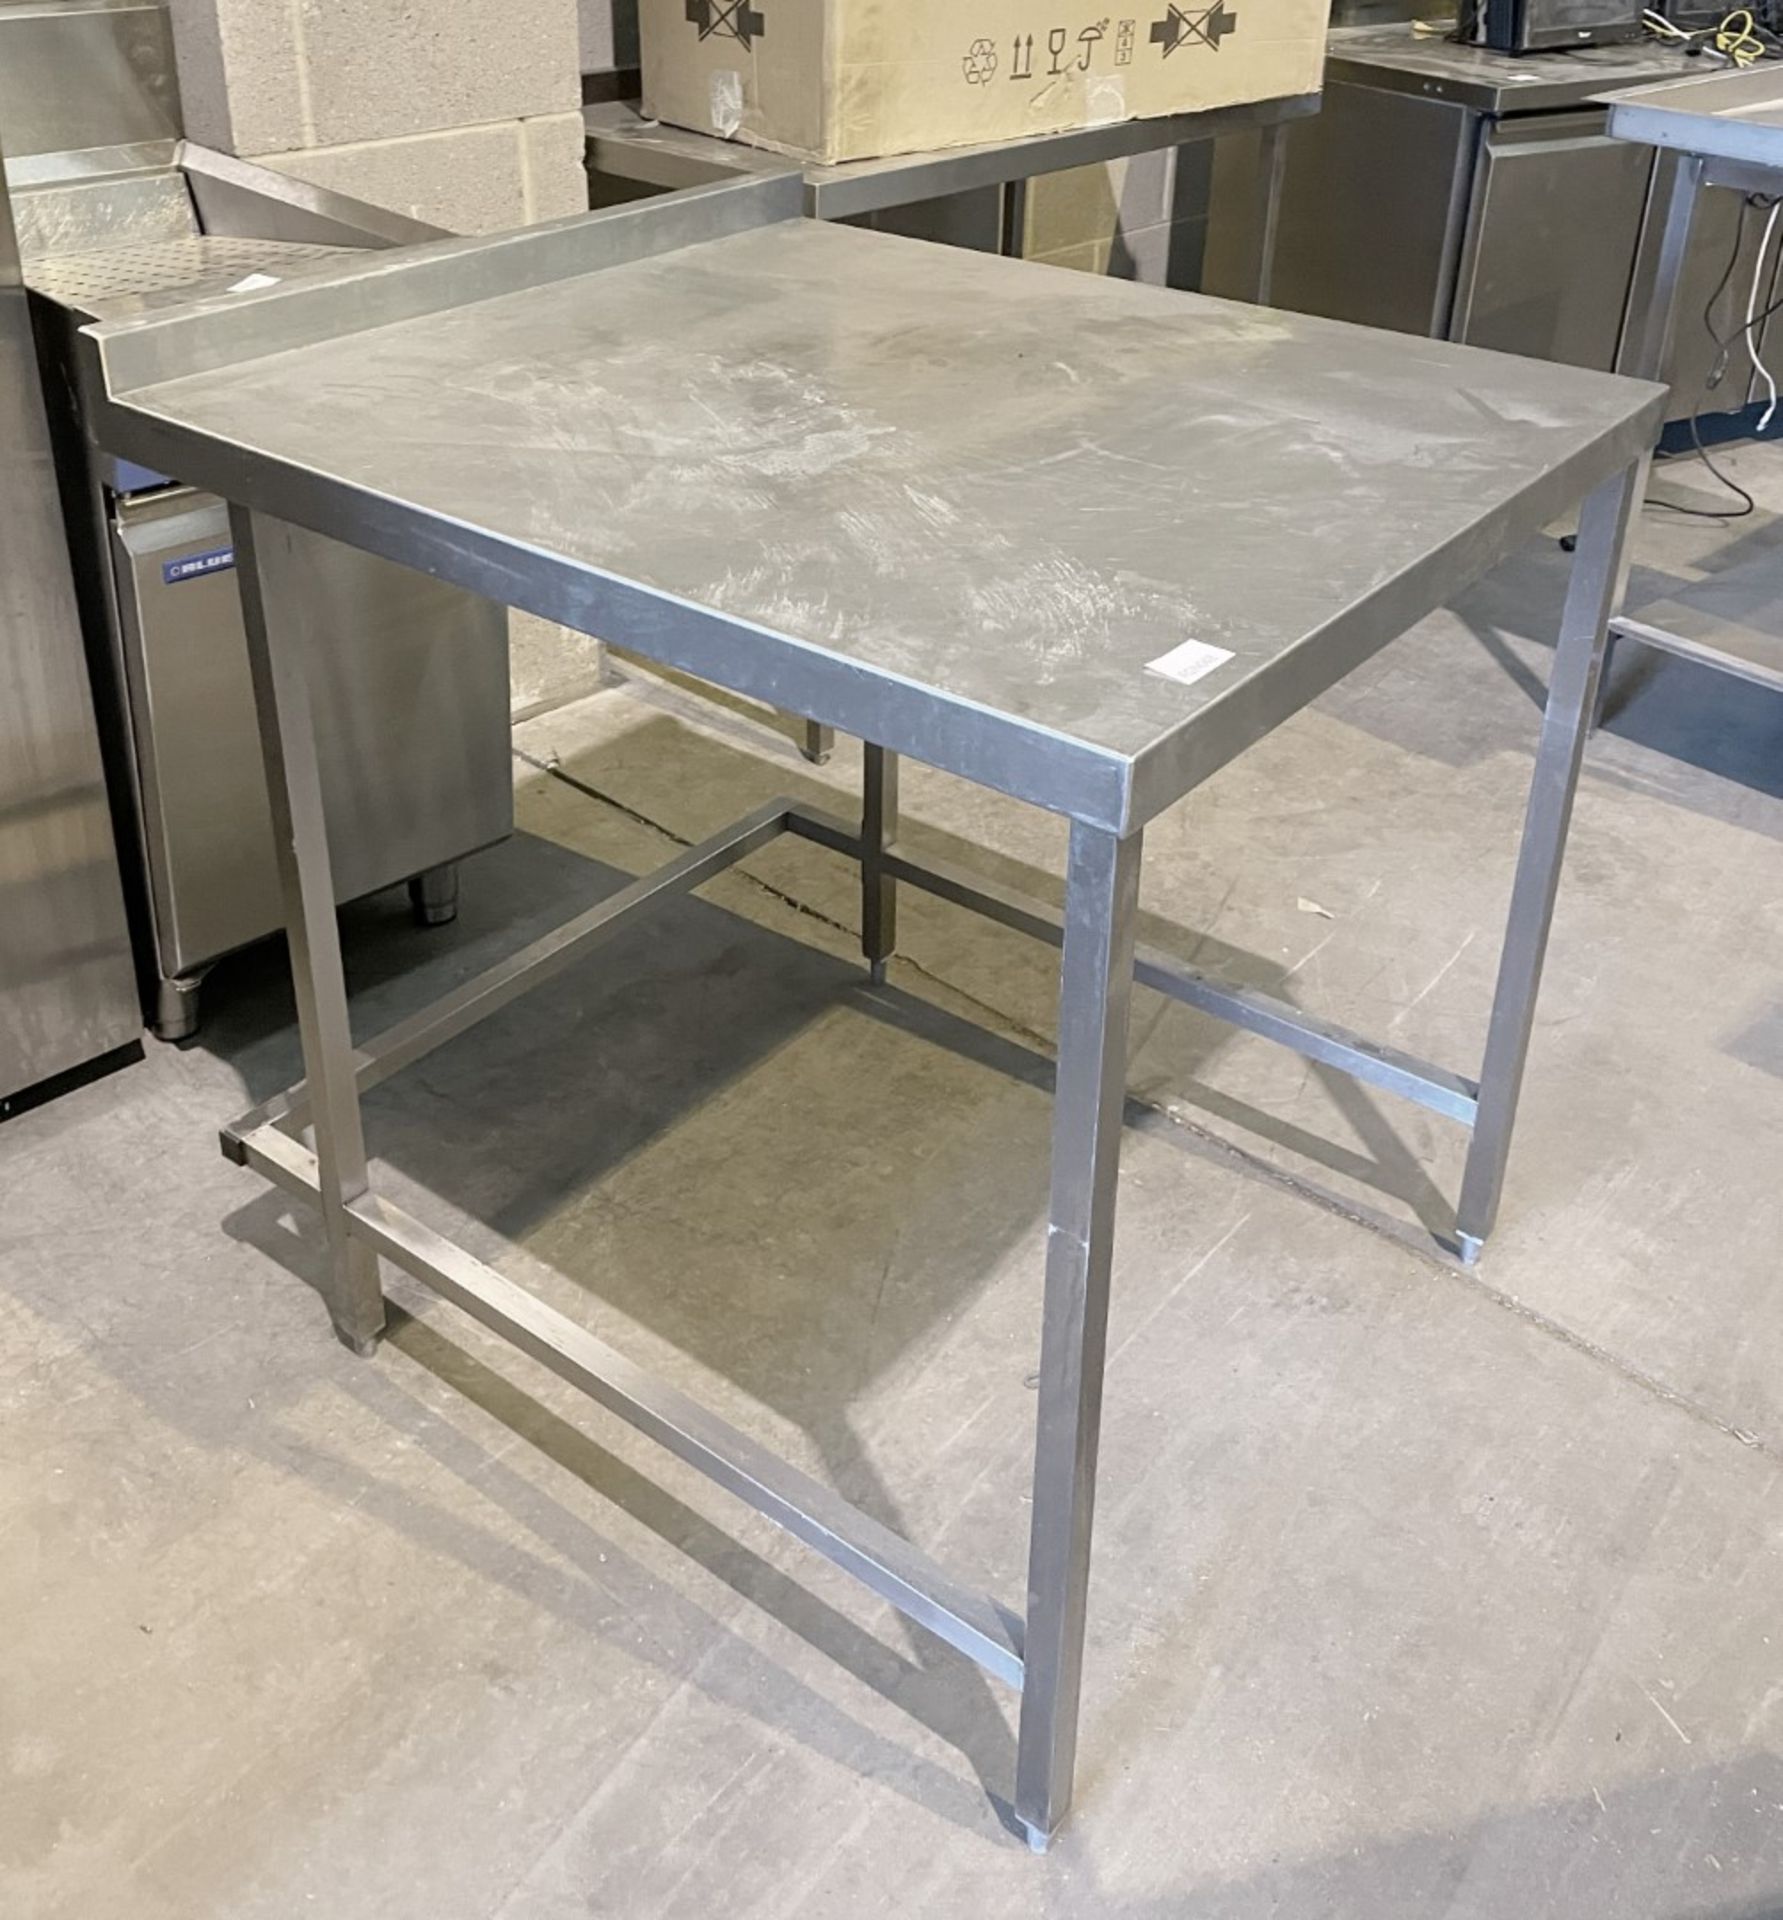 1 X Stainless Steel Prep Table - Approx 84X95X92Cm - Ref: FGN048 - CL834 - Location: Essex, RM19This - Image 4 of 4